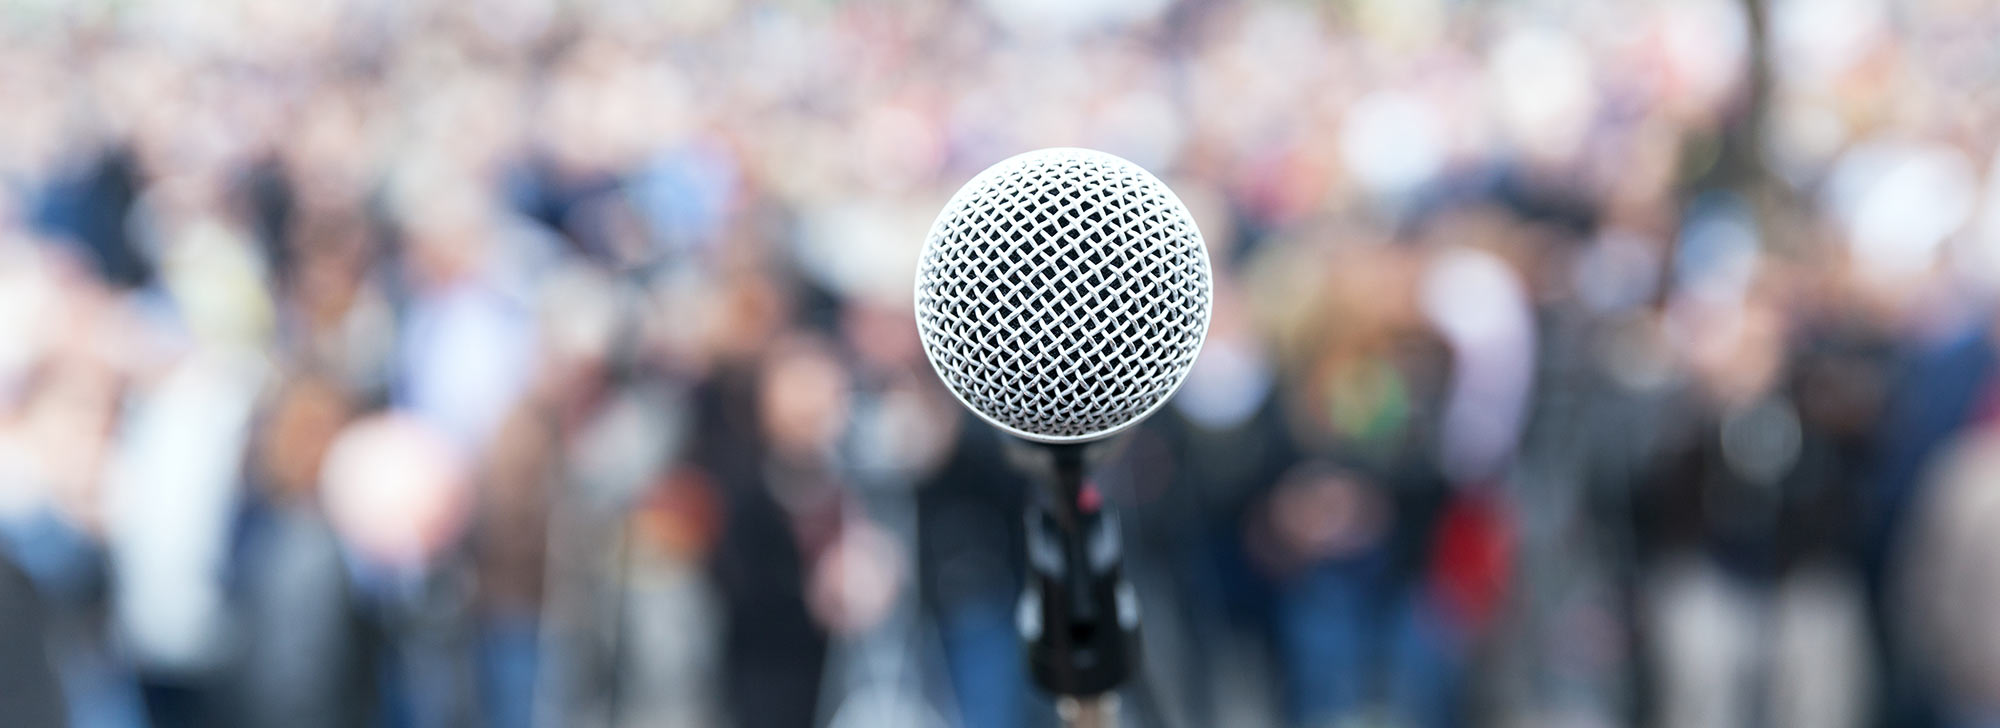 A microphone in front of a crowd of people